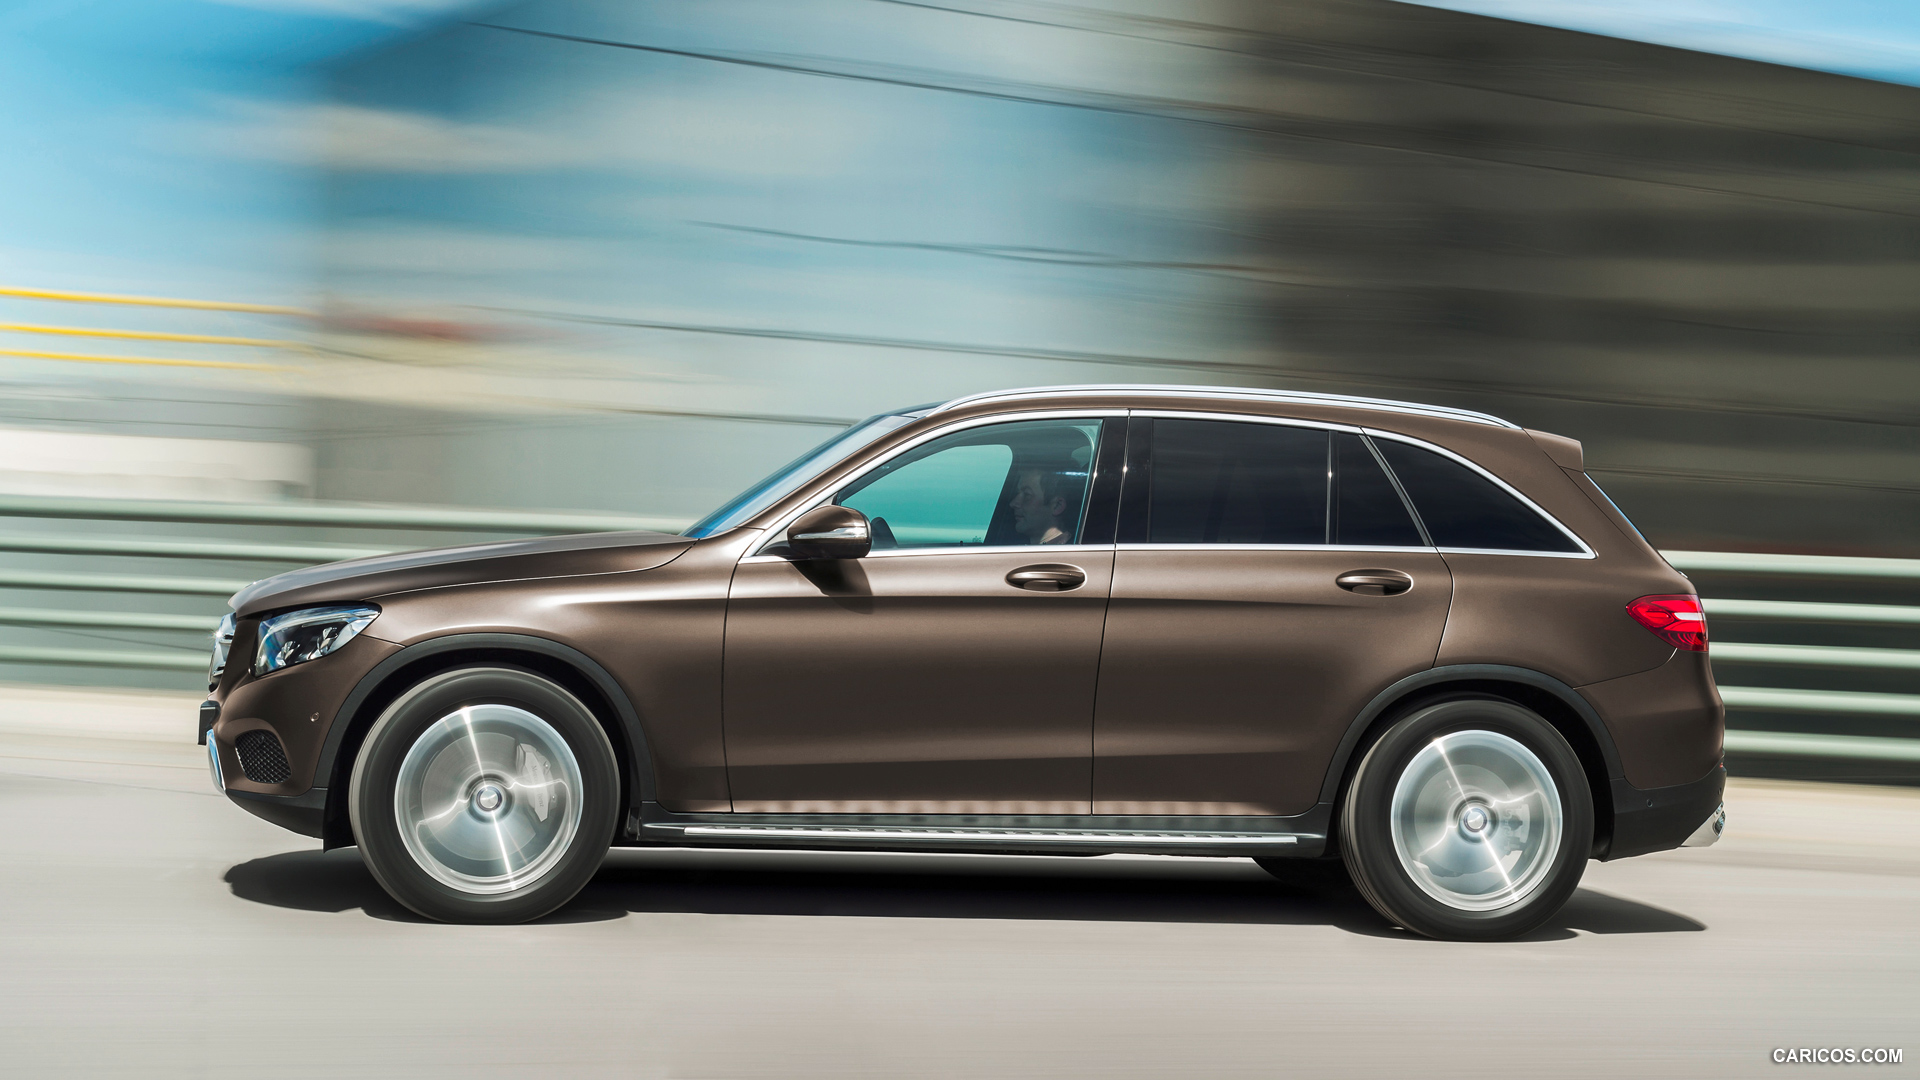 2016 Mercedes-Benz GLC-Class GLC 250d 4MATIC (Citrine Brown Magno, Offroad Line) - Side, #16 of 254